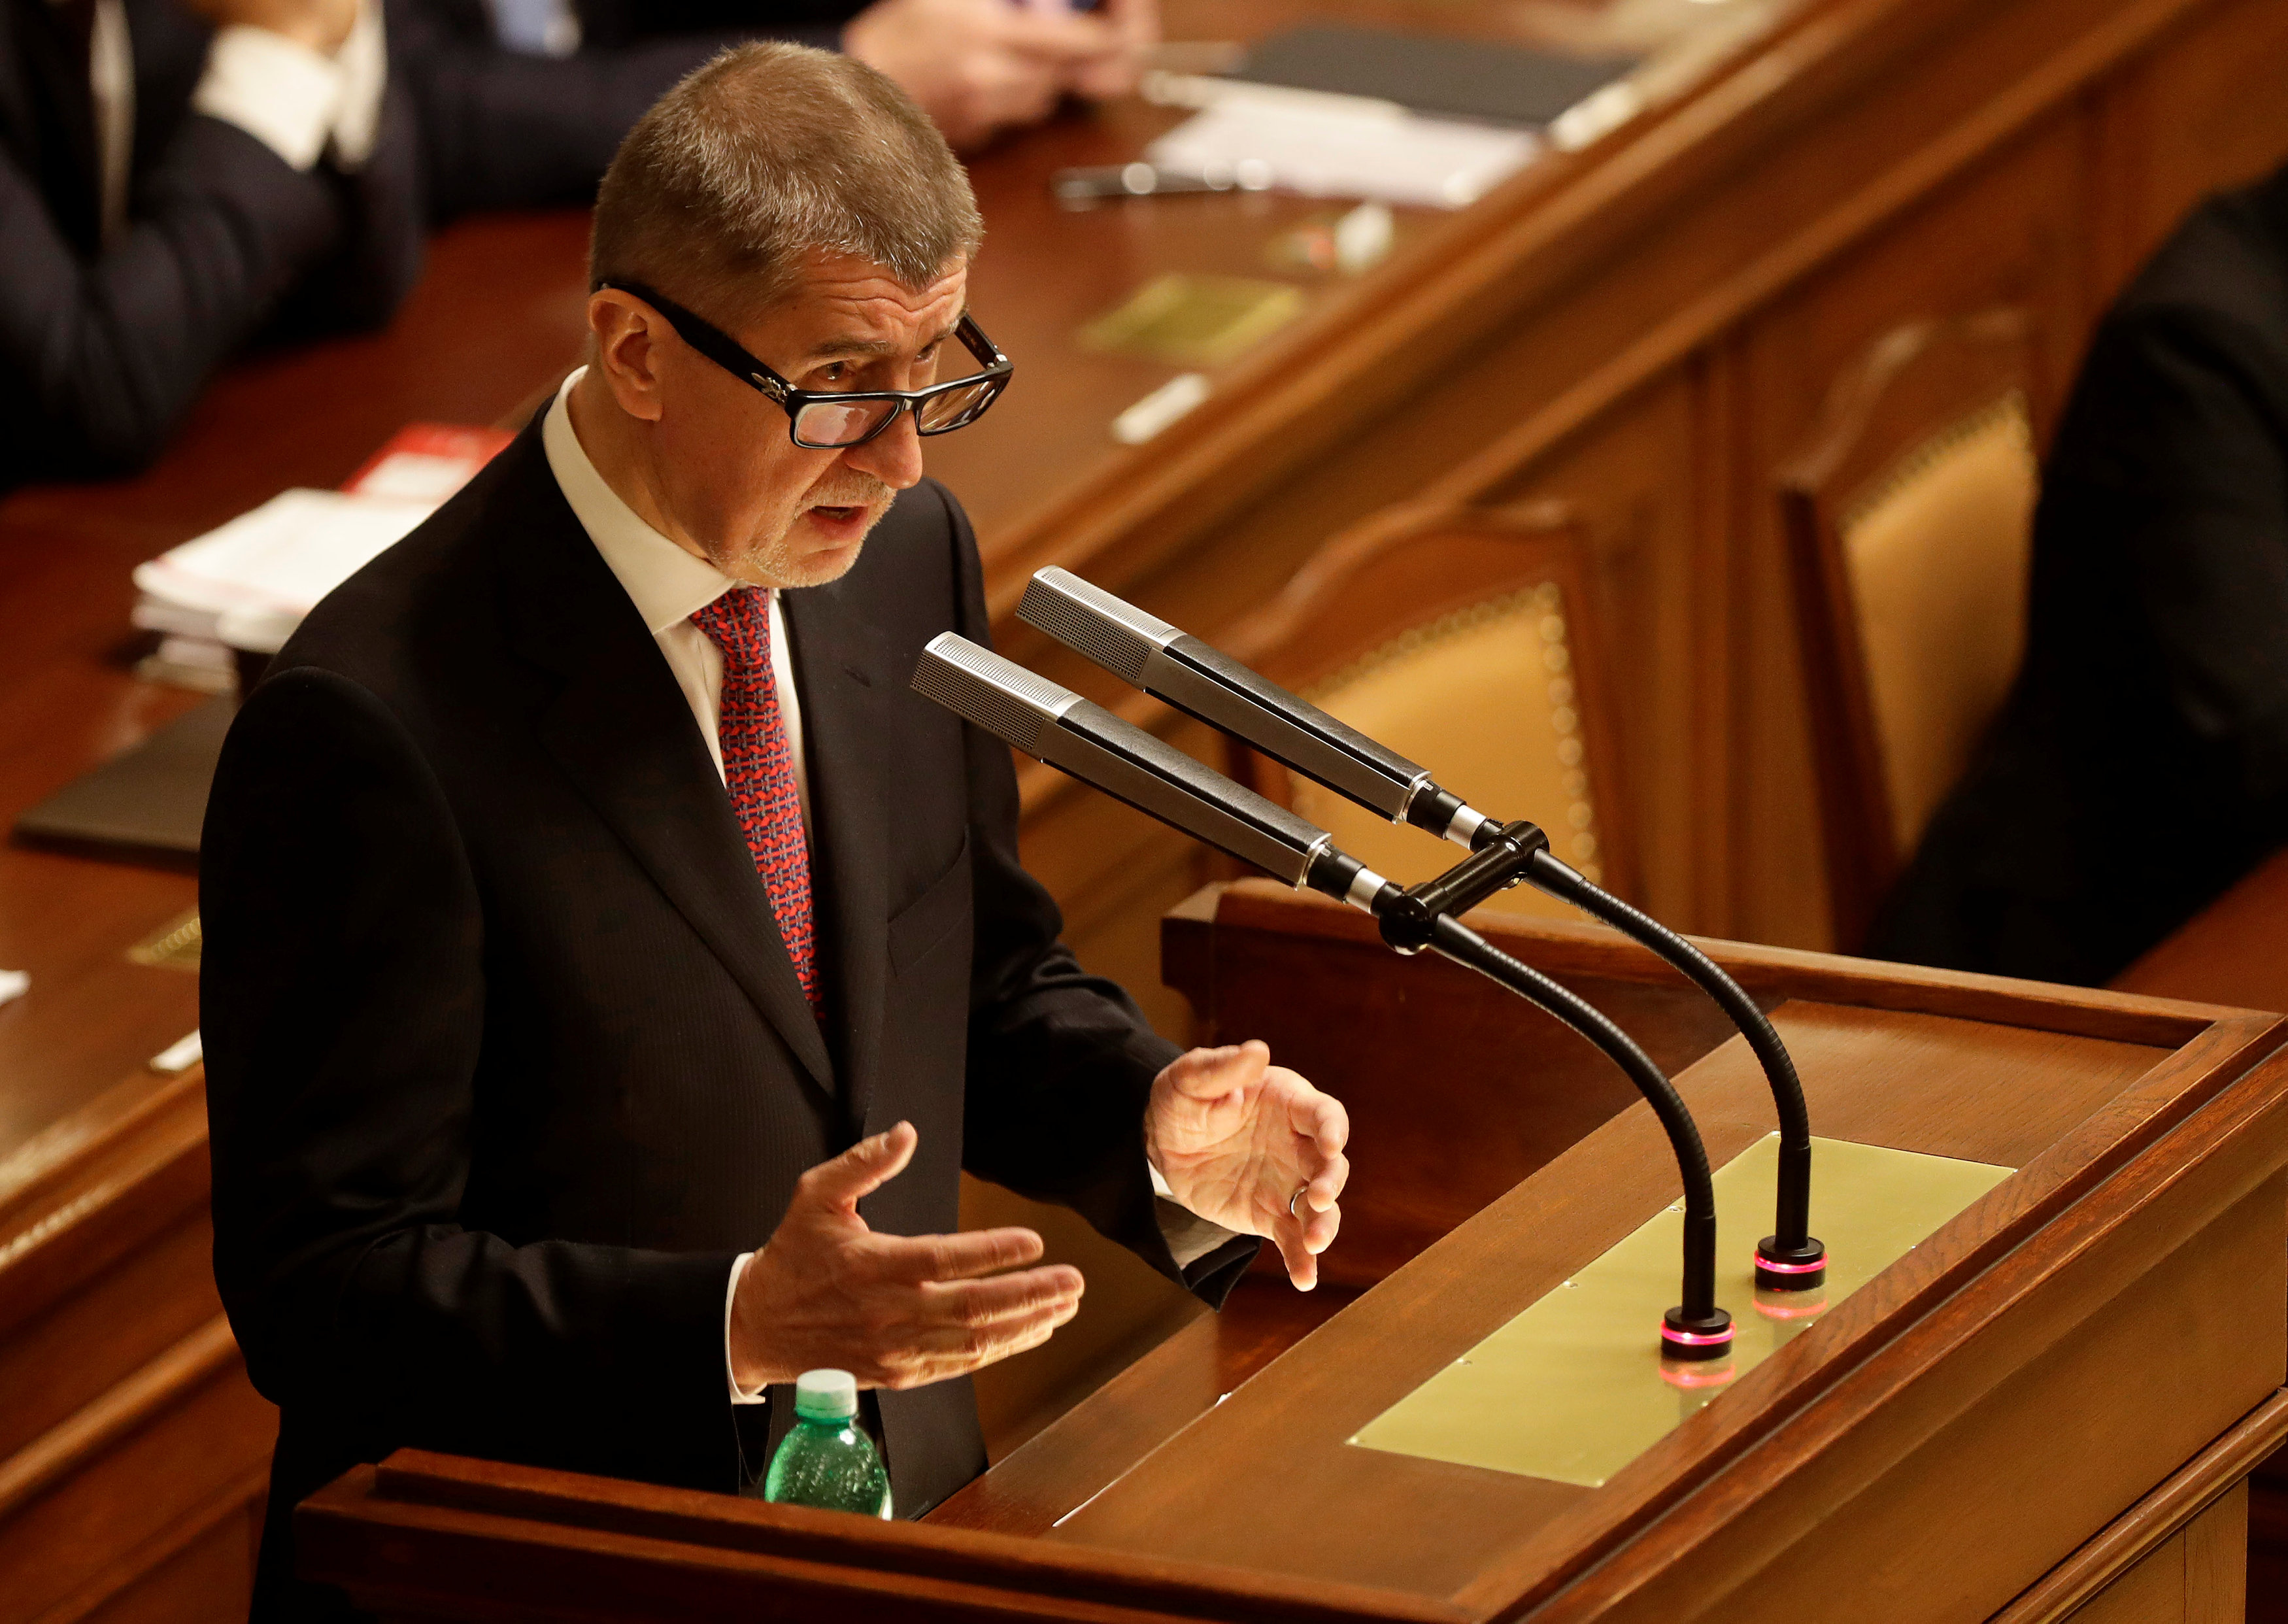 Czech prime minister ready to face EU subsidy fraud allegations